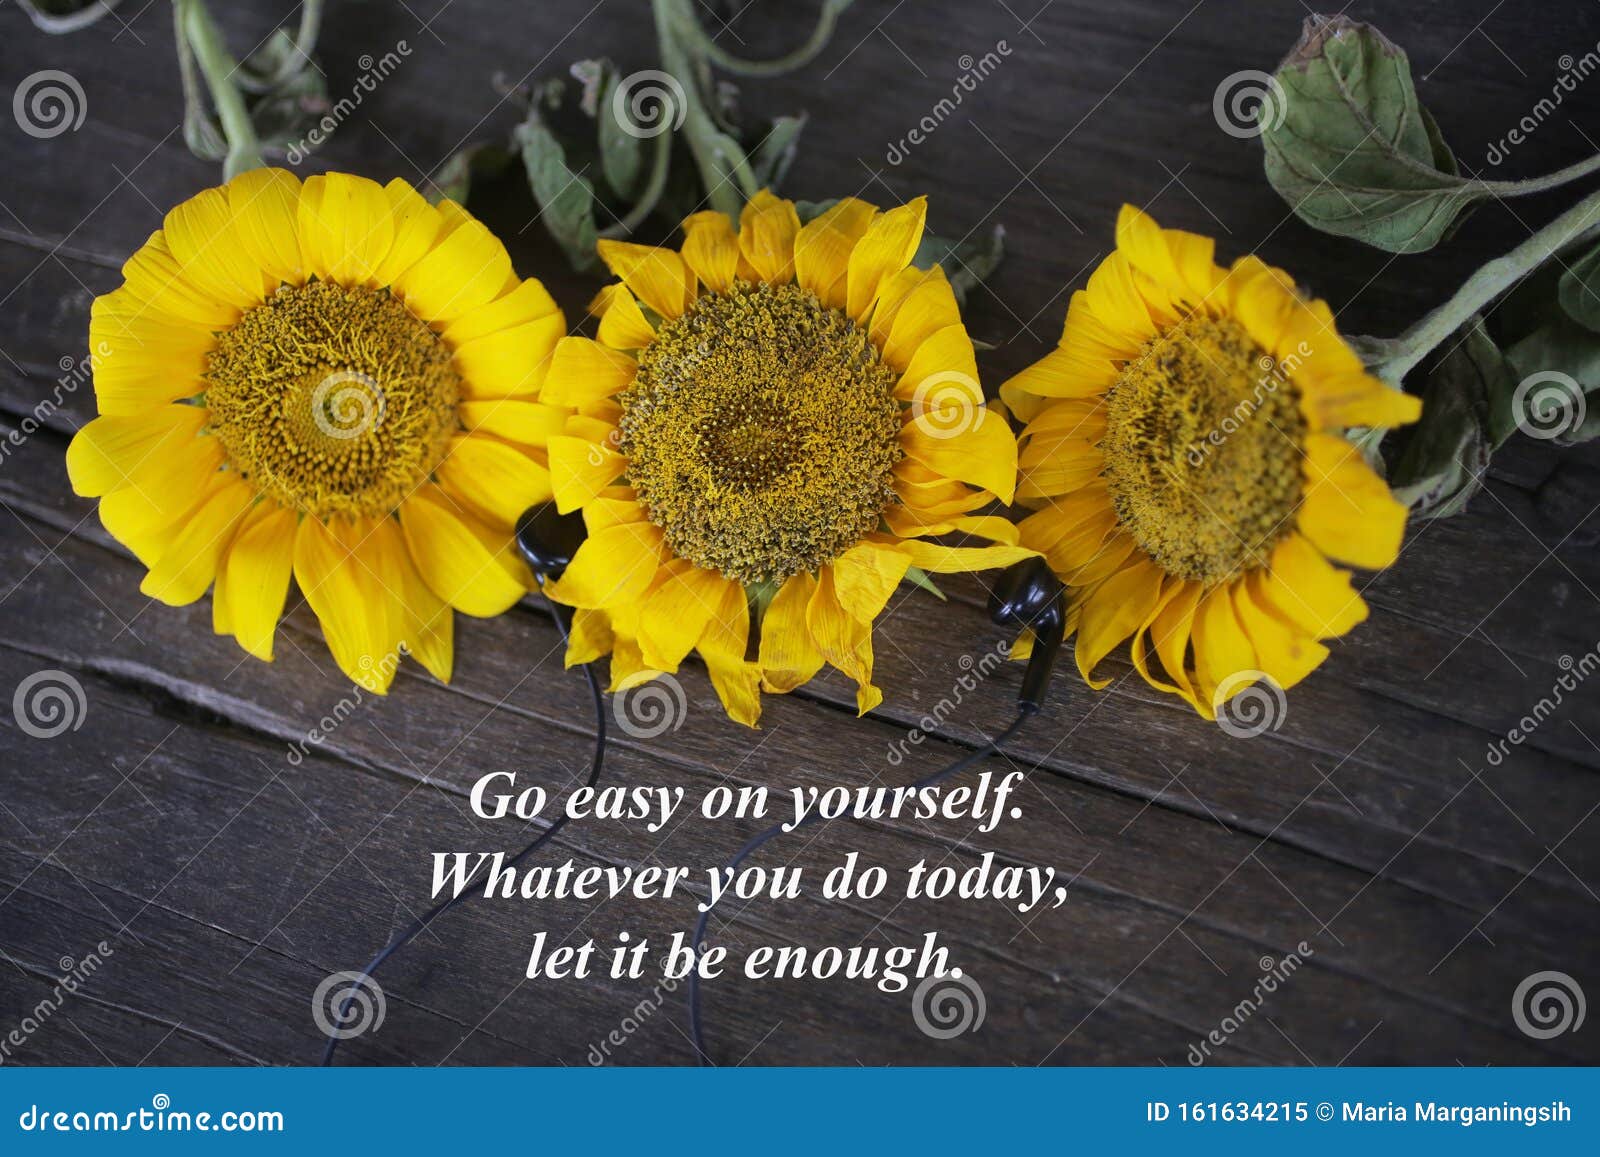 inspirational words with yellow sun flowers - go easy on yourself. whatever you do today, let it be enough.